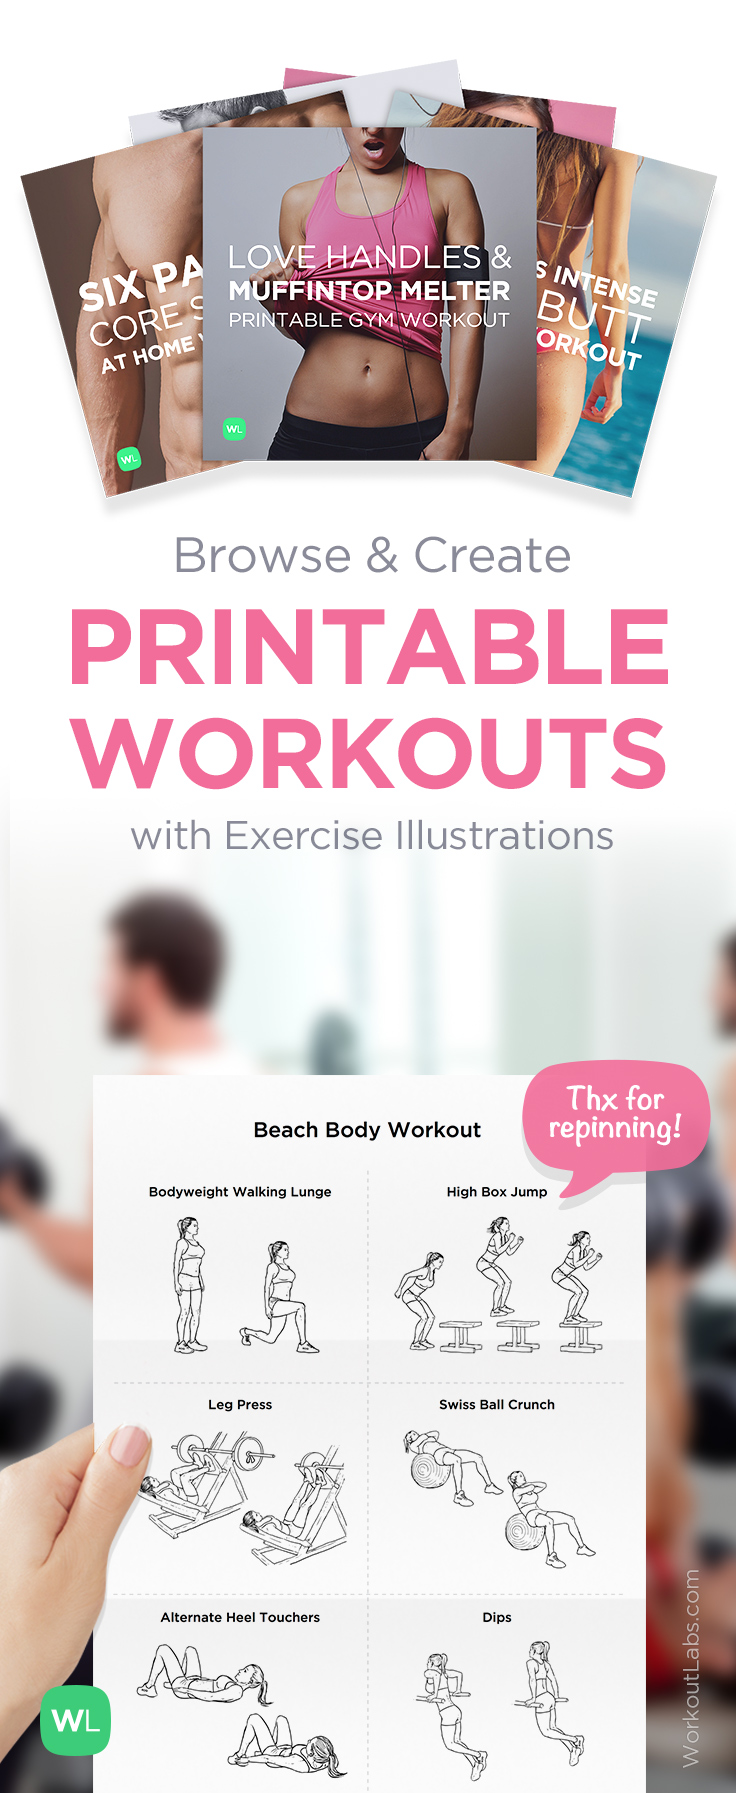 6-best-images-of-free-printable-workout-plans-free-printable-exercise